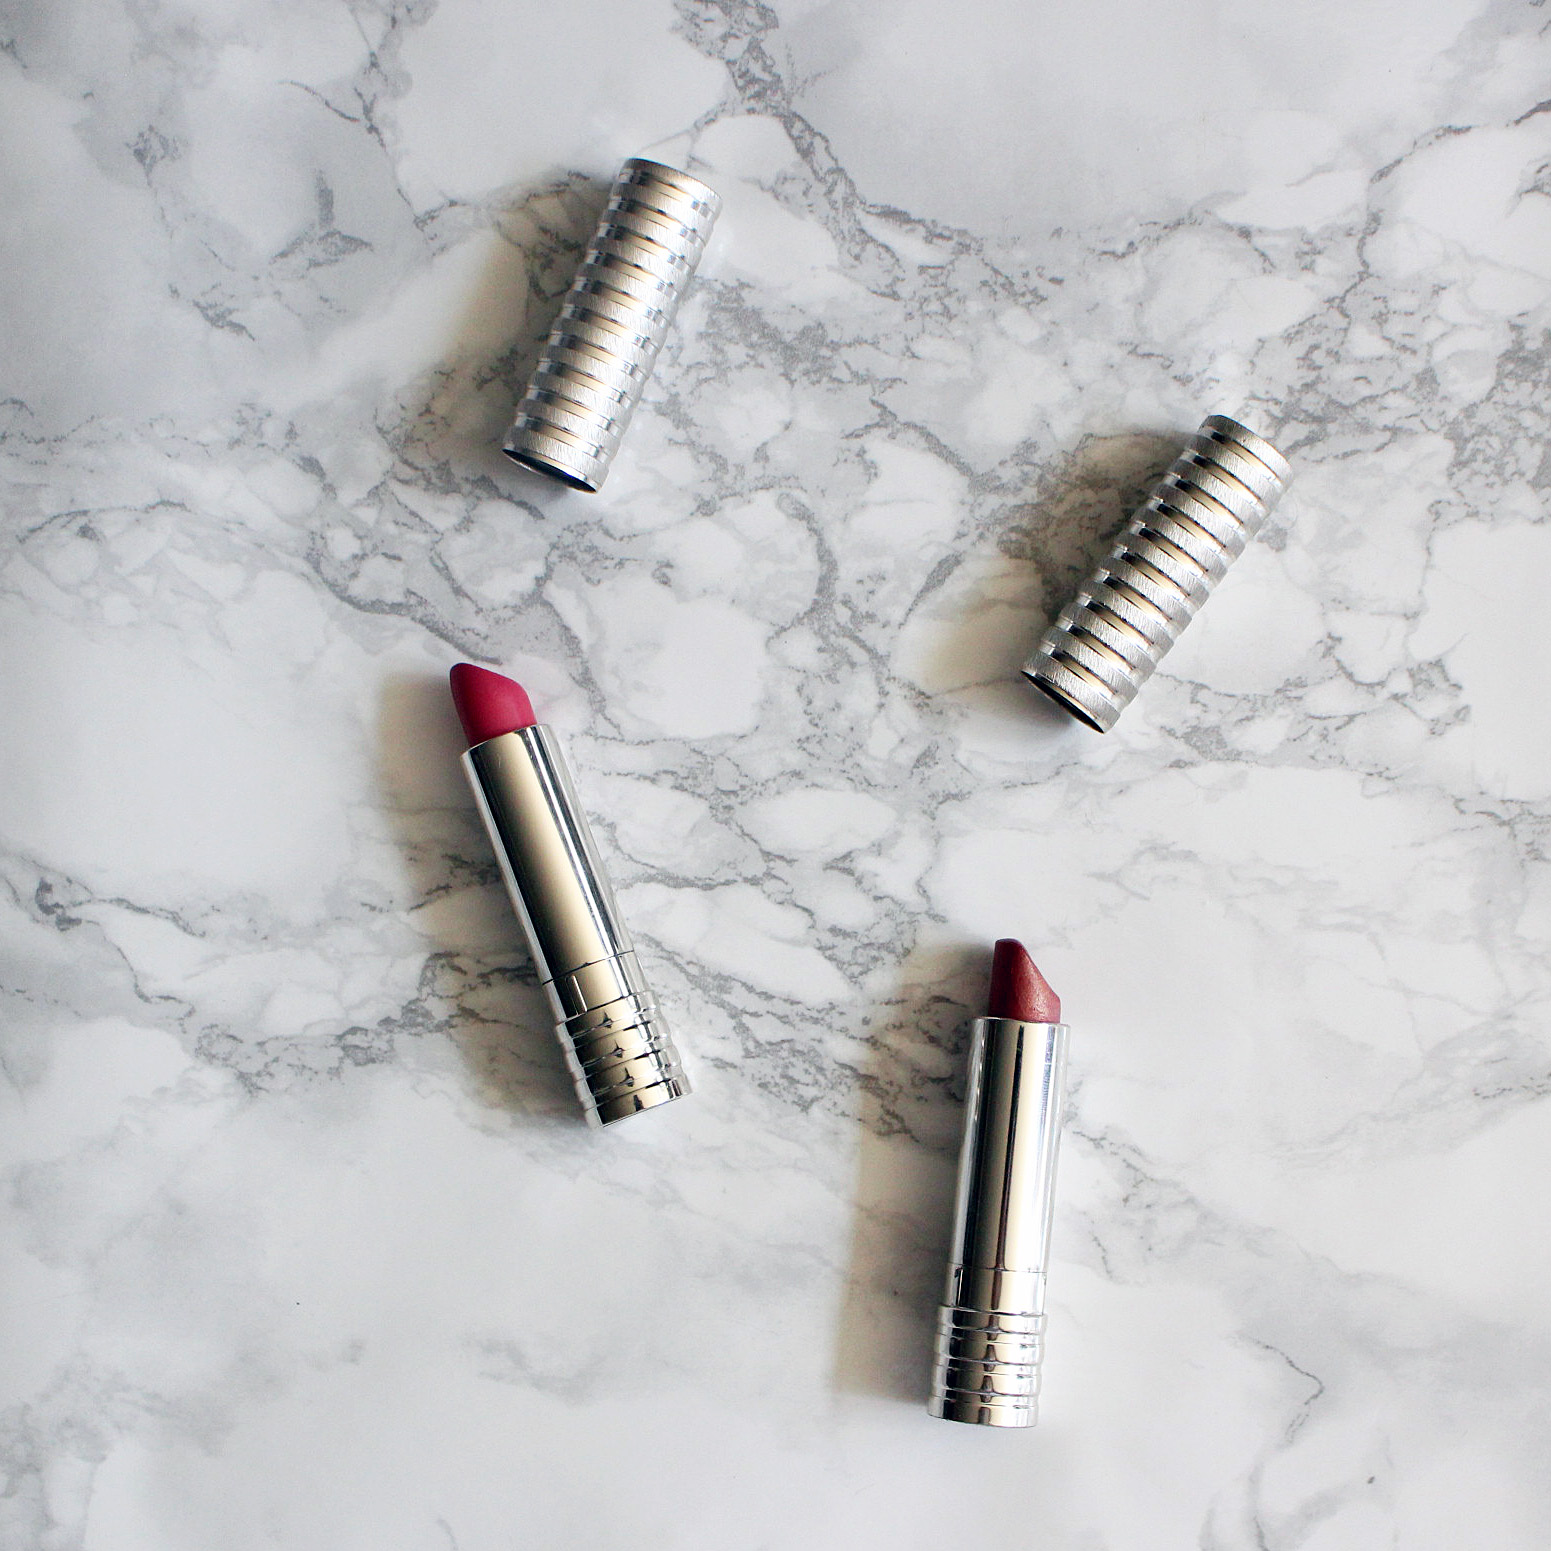 Clinique lipsticks are the best for finding the perfect "your lips but better" shade. Via GlassofGlam.com